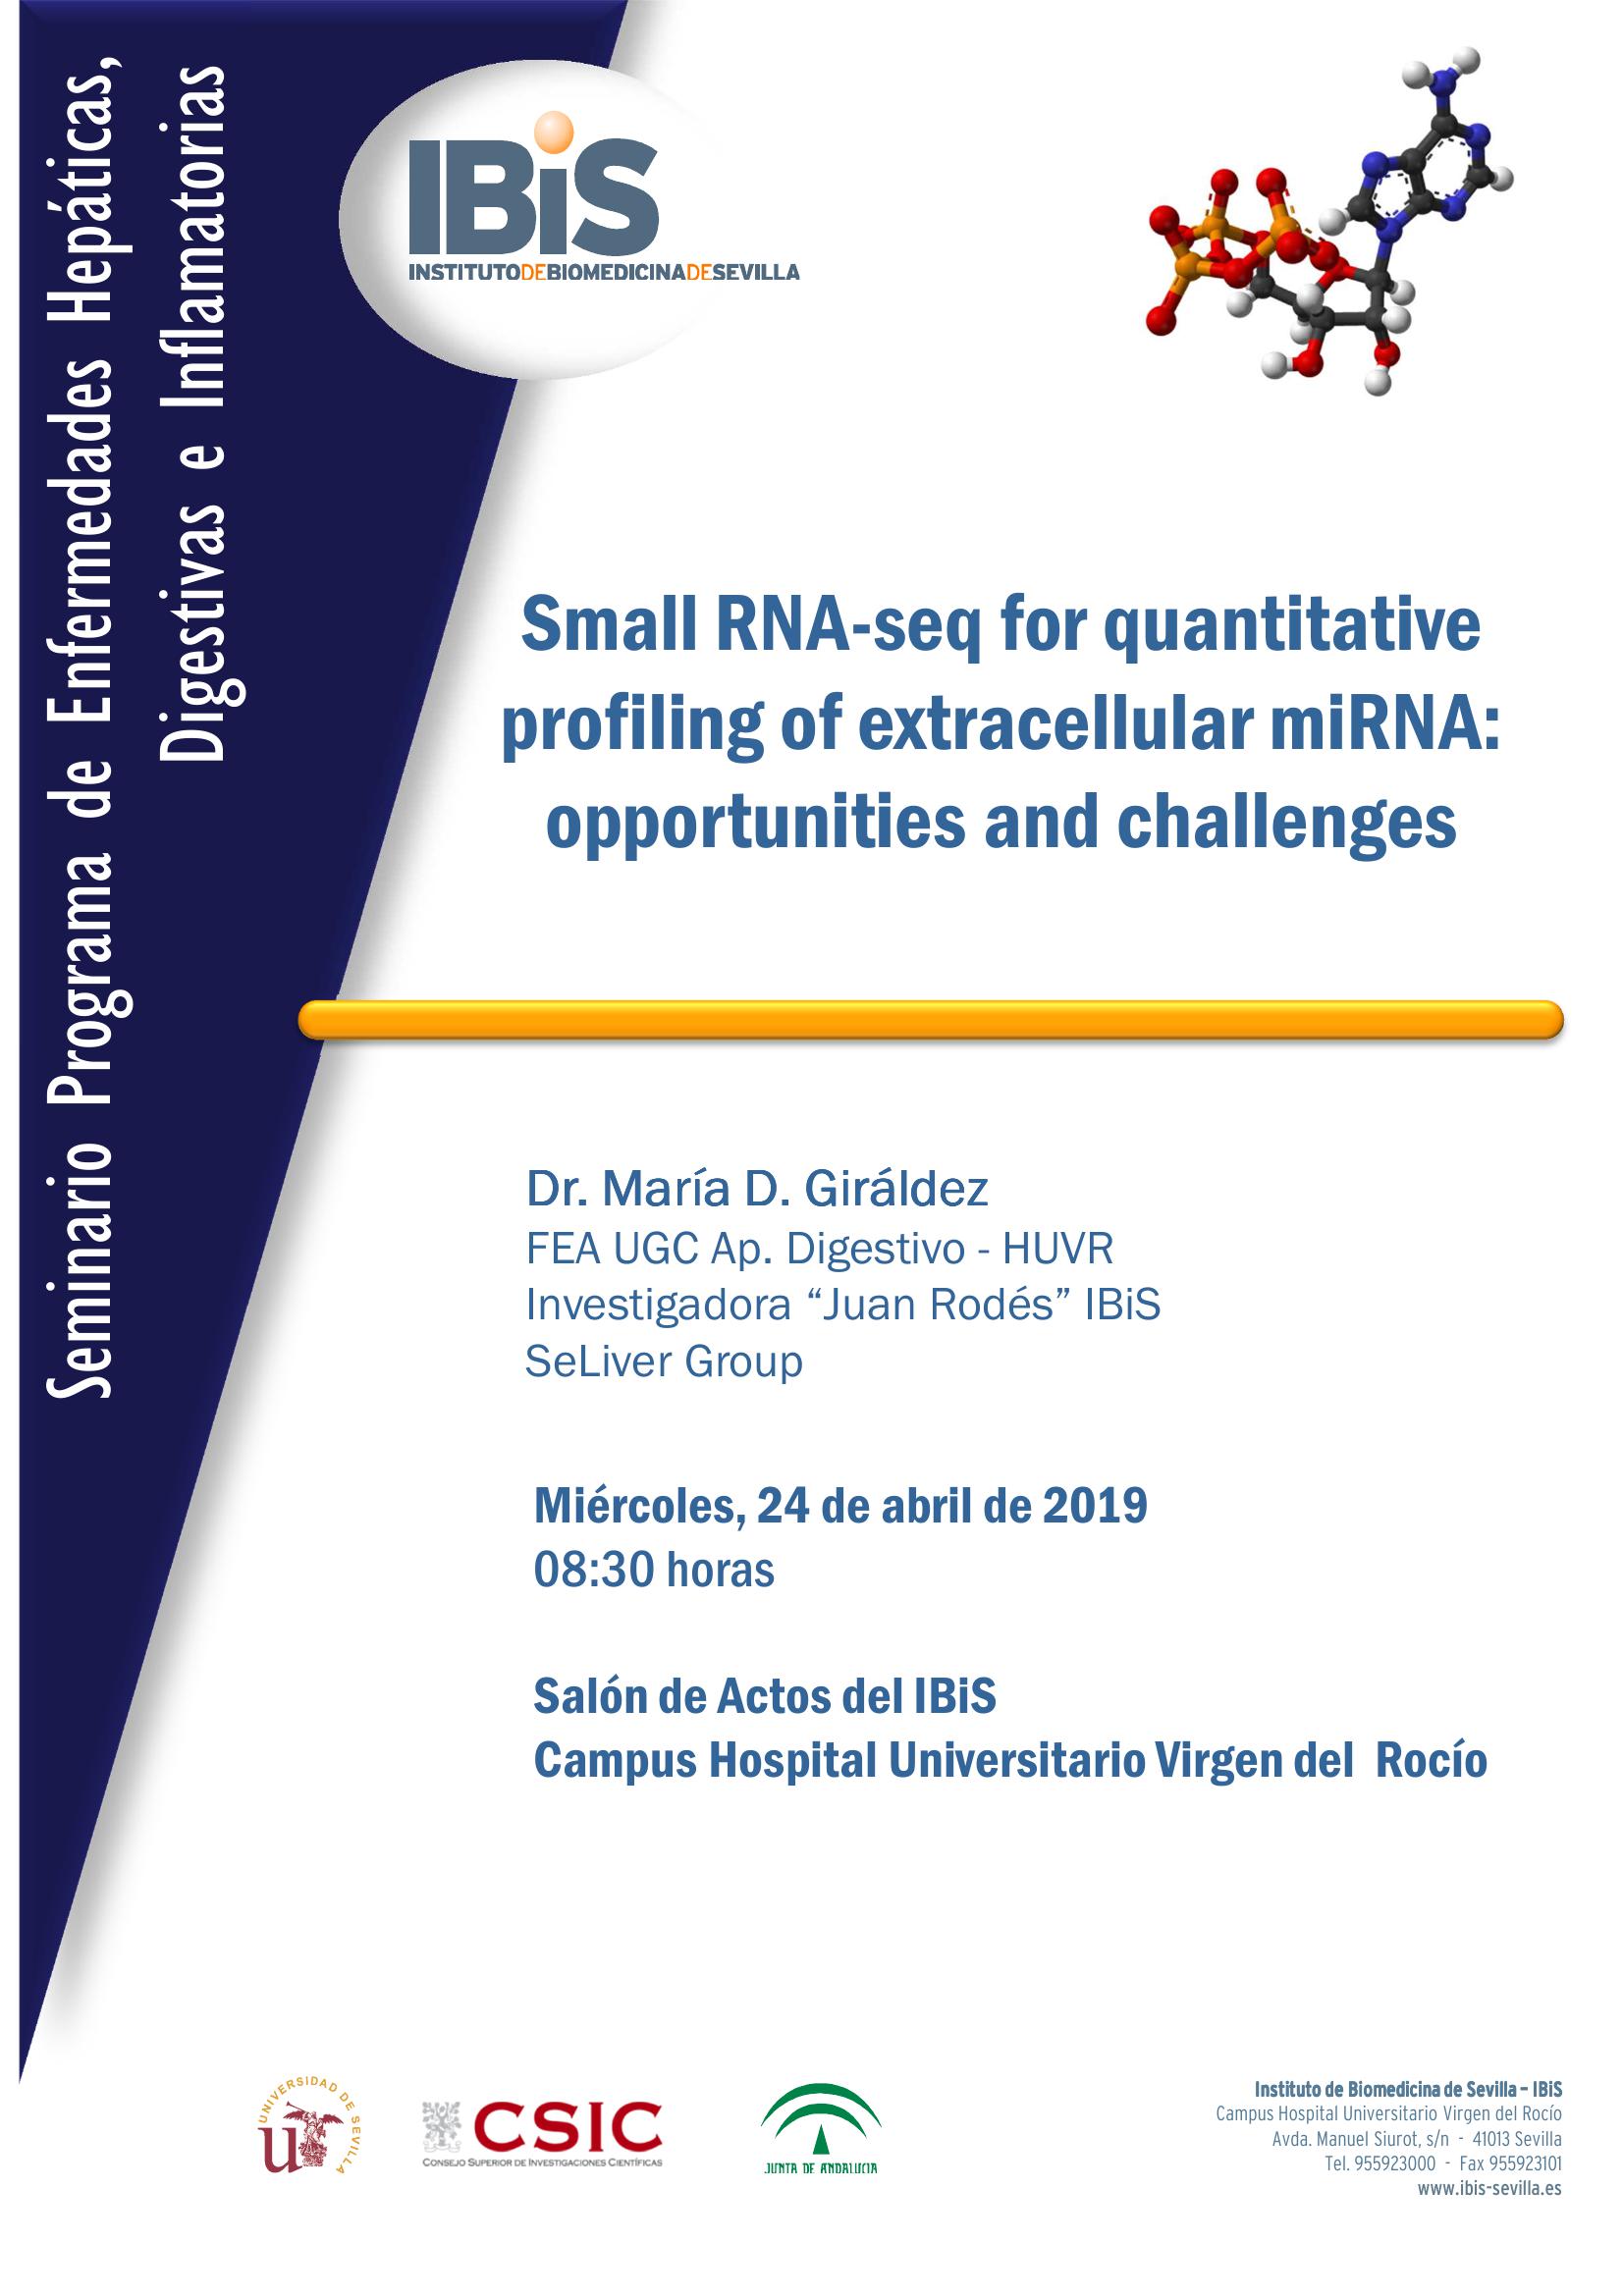 Poster: Small RNA-seq for quantitative profiling of extracellular miRNA: opportunities and challenges